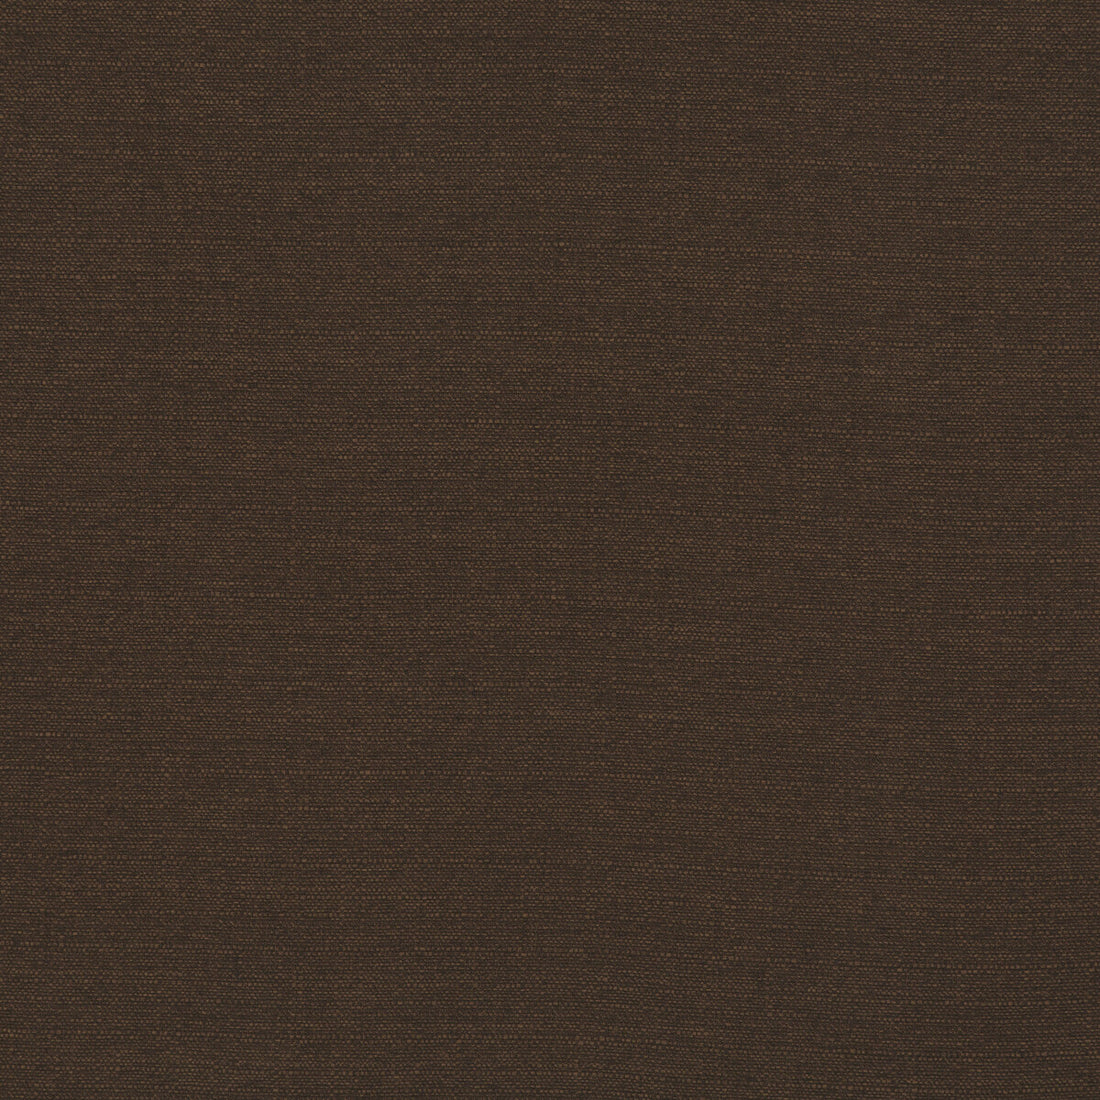 Lansdowne fabric in mahogany color - pattern PF50413.265.0 - by Baker Lifestyle in the Notebooks collection